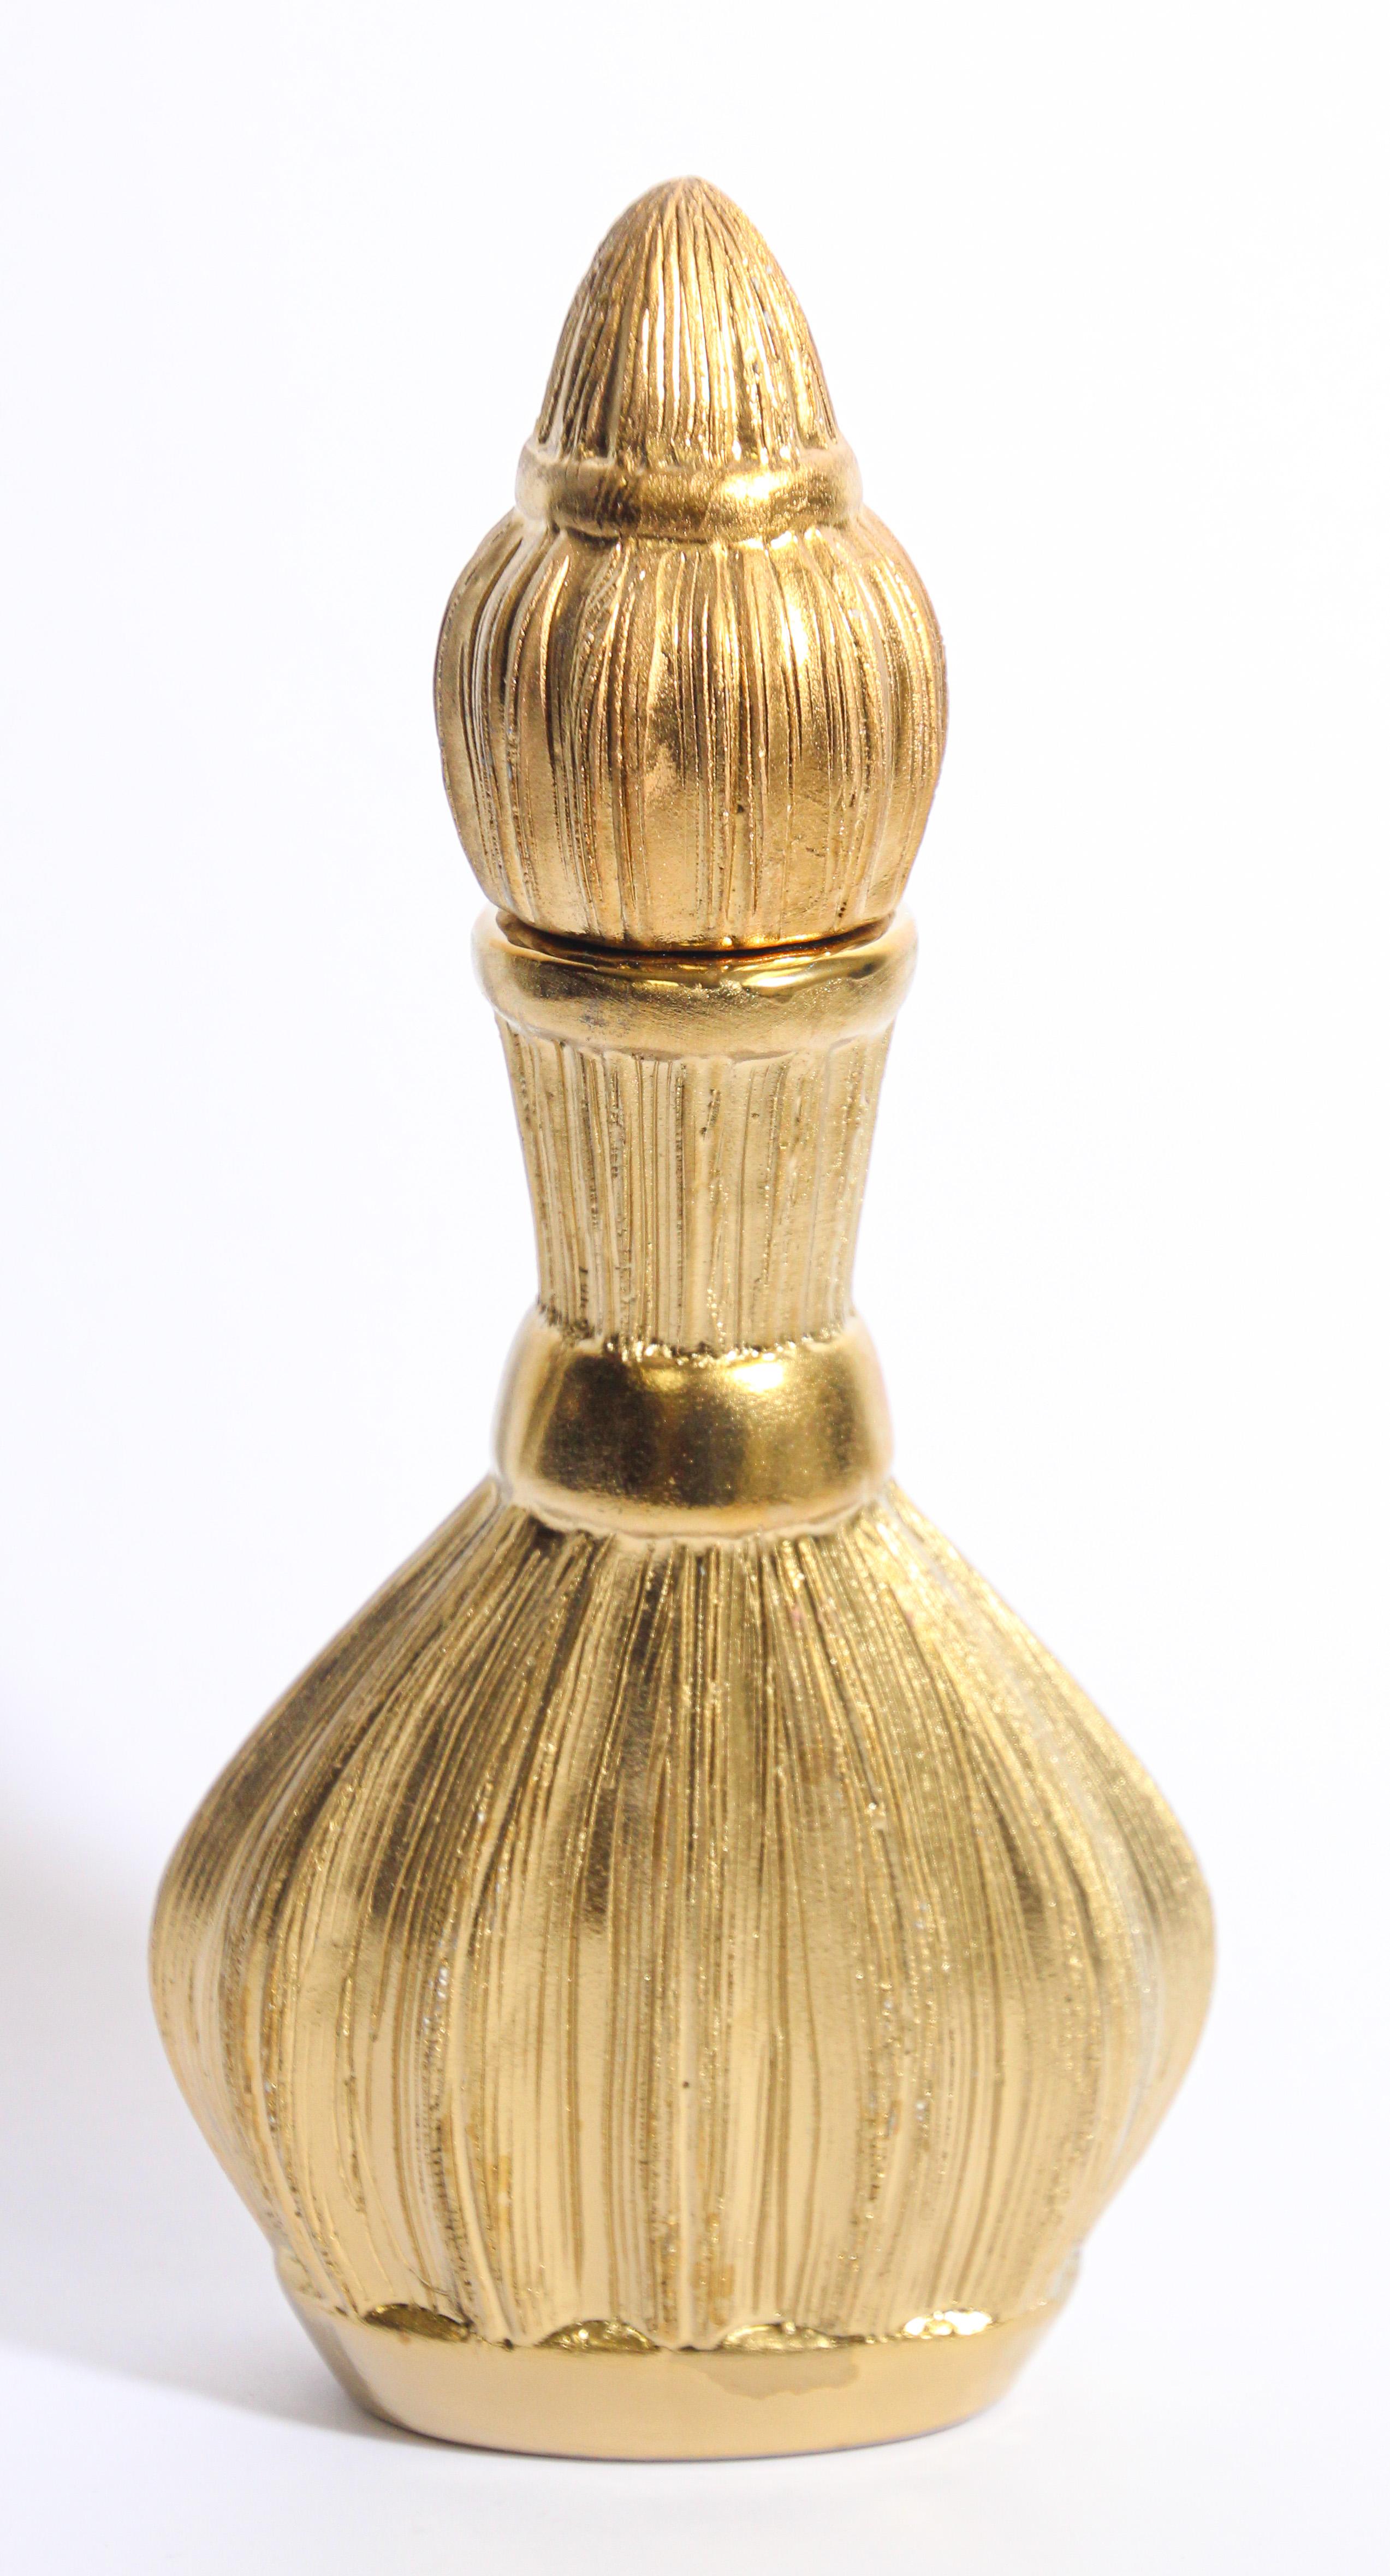 Moorish decorative gilt porcelain flask with lid.
The bottle is shaped into soft ripples and given a radiant gold finish.
Nice decorative object with a lid in the shape of a Moorish turban head cover.
Turkish Ottoman or Middle Eastern shape